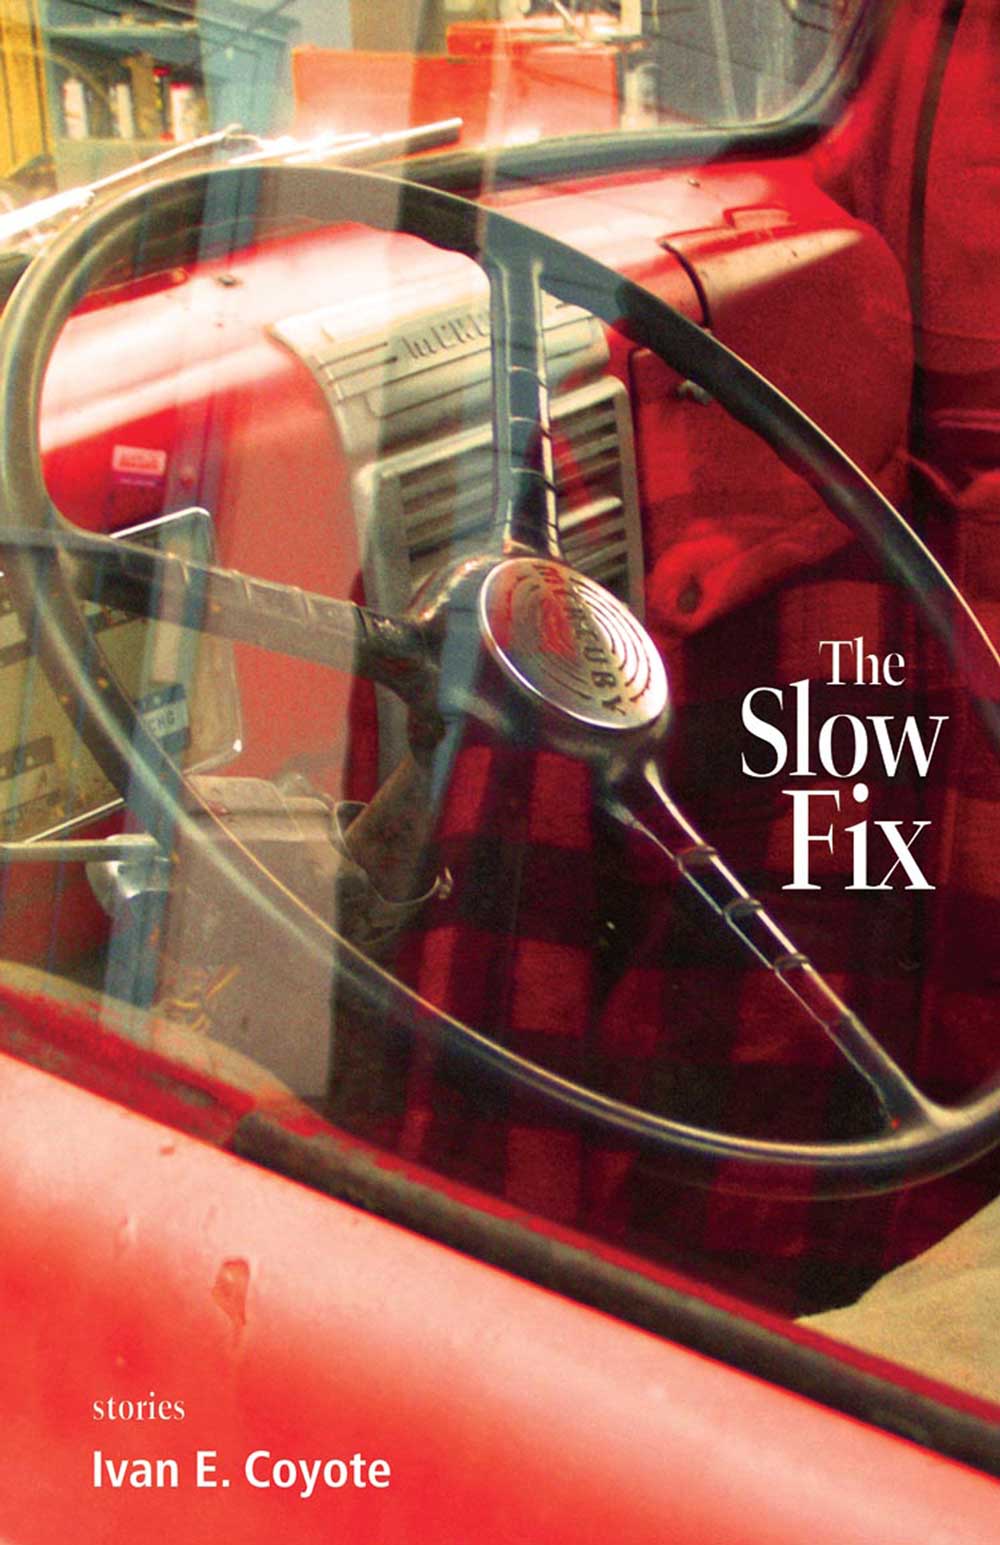 The Slow Fix by Ivan E. Coyote